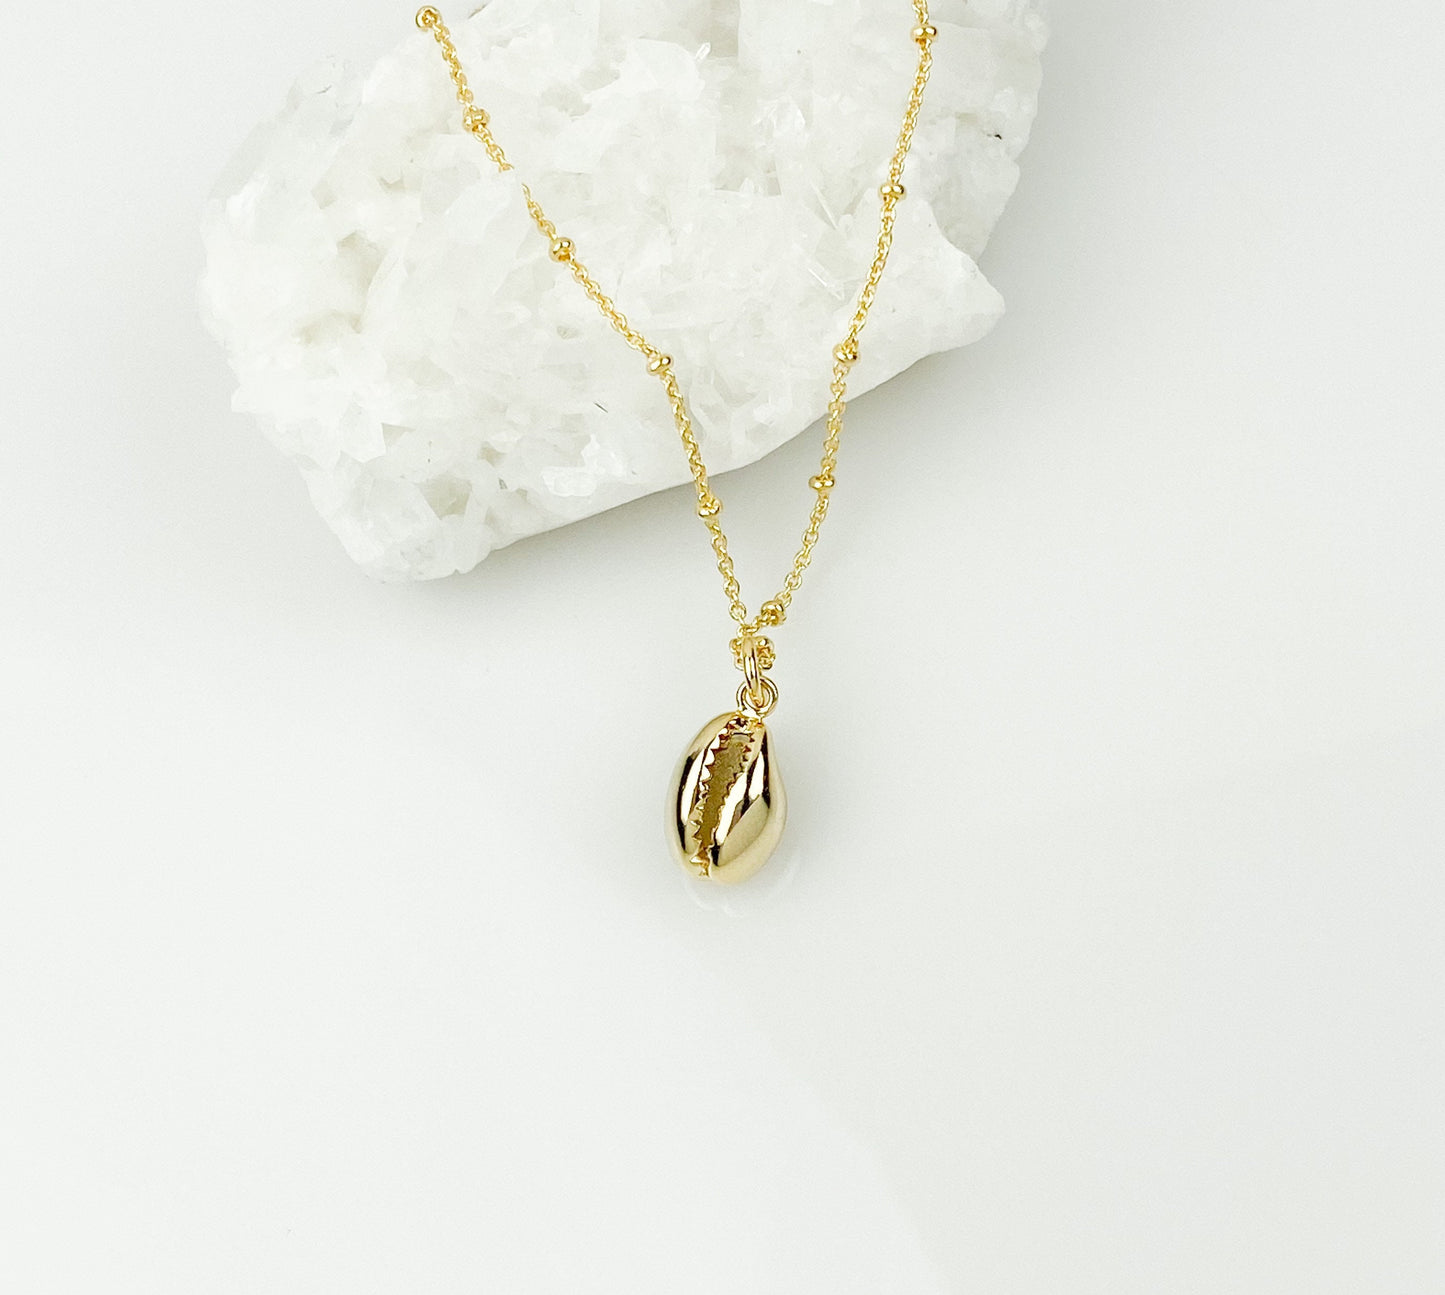 Shell necklace, cowrie shell necklace, gold necklace, dainty jewelry, gifts for her, gifts for women